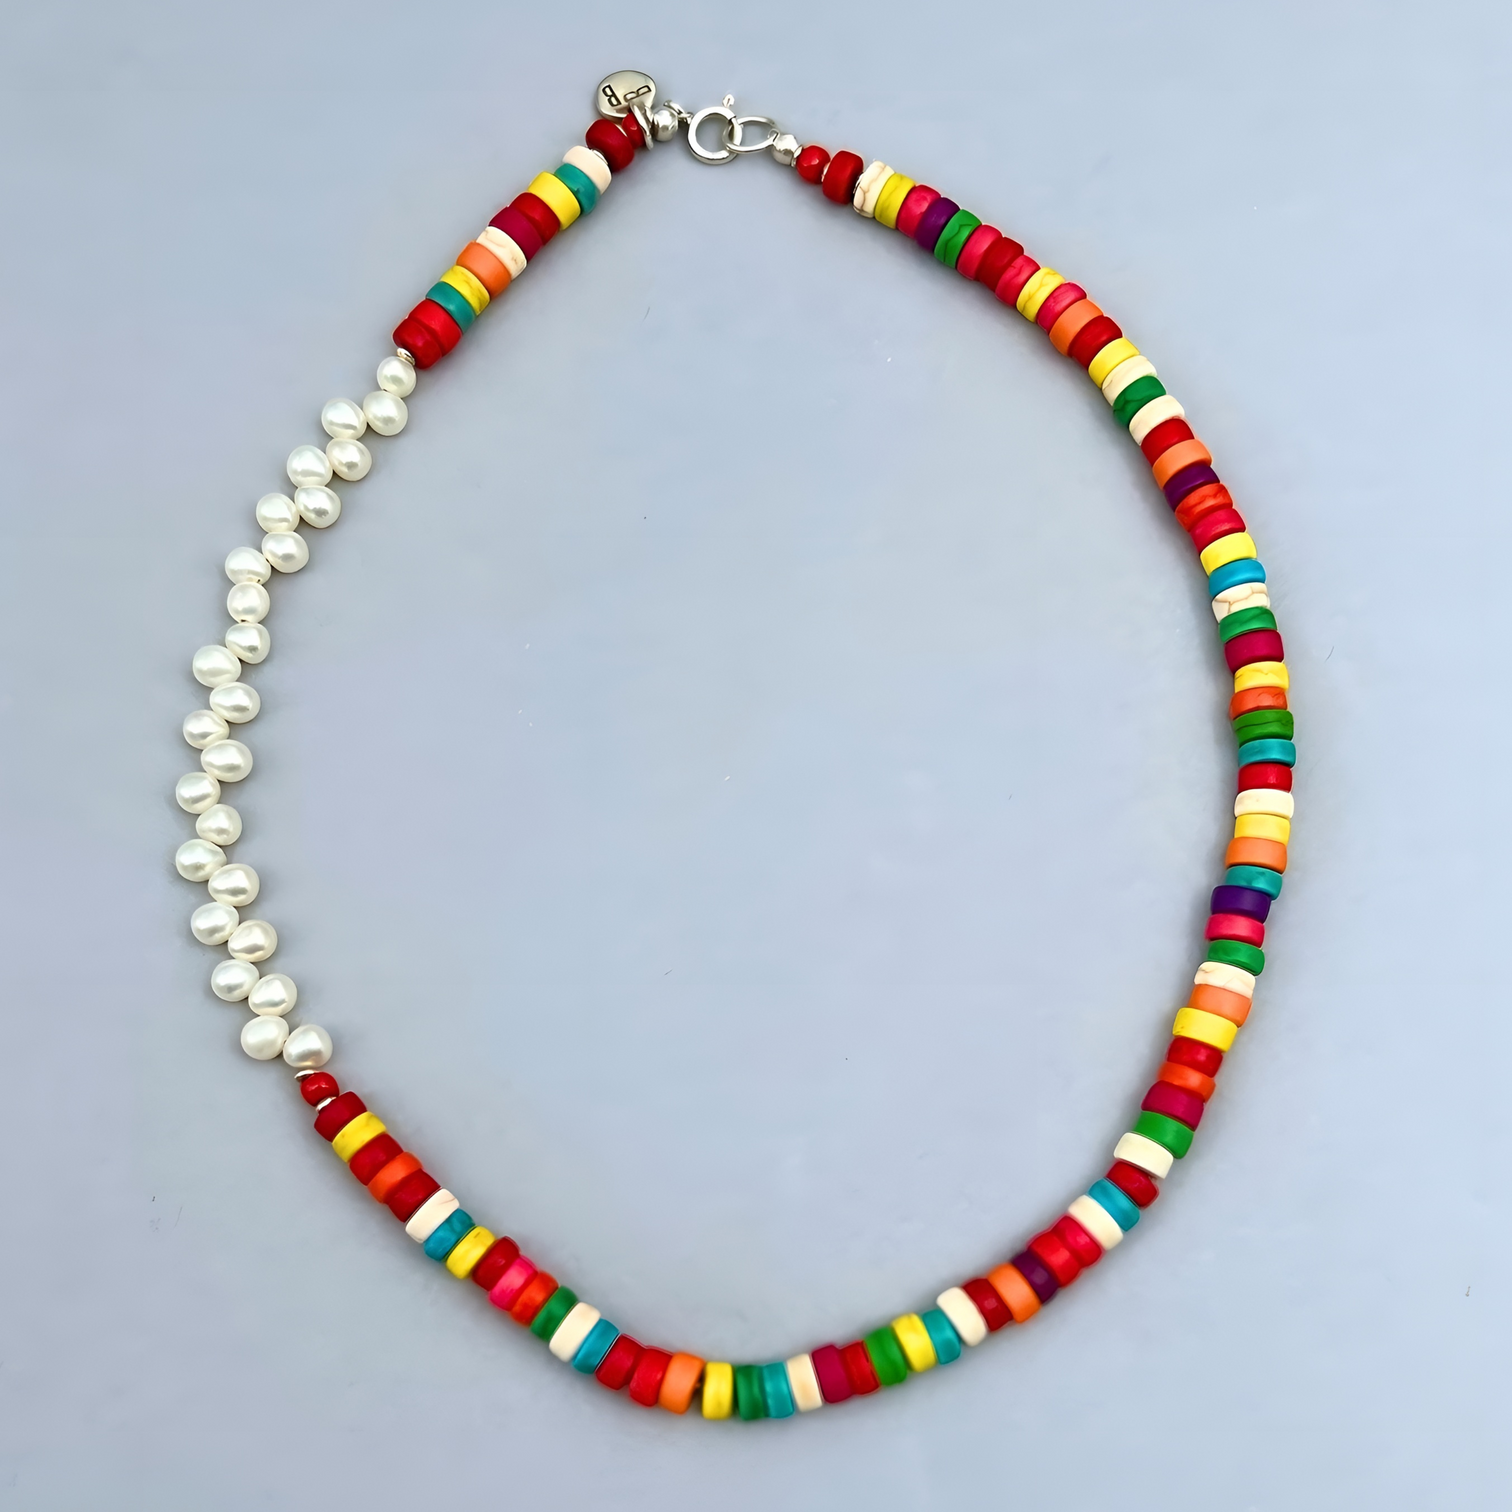 The trendy Le BijouBijou Rainbow Necklace made with Pearls and multicolored Howlite Discs.